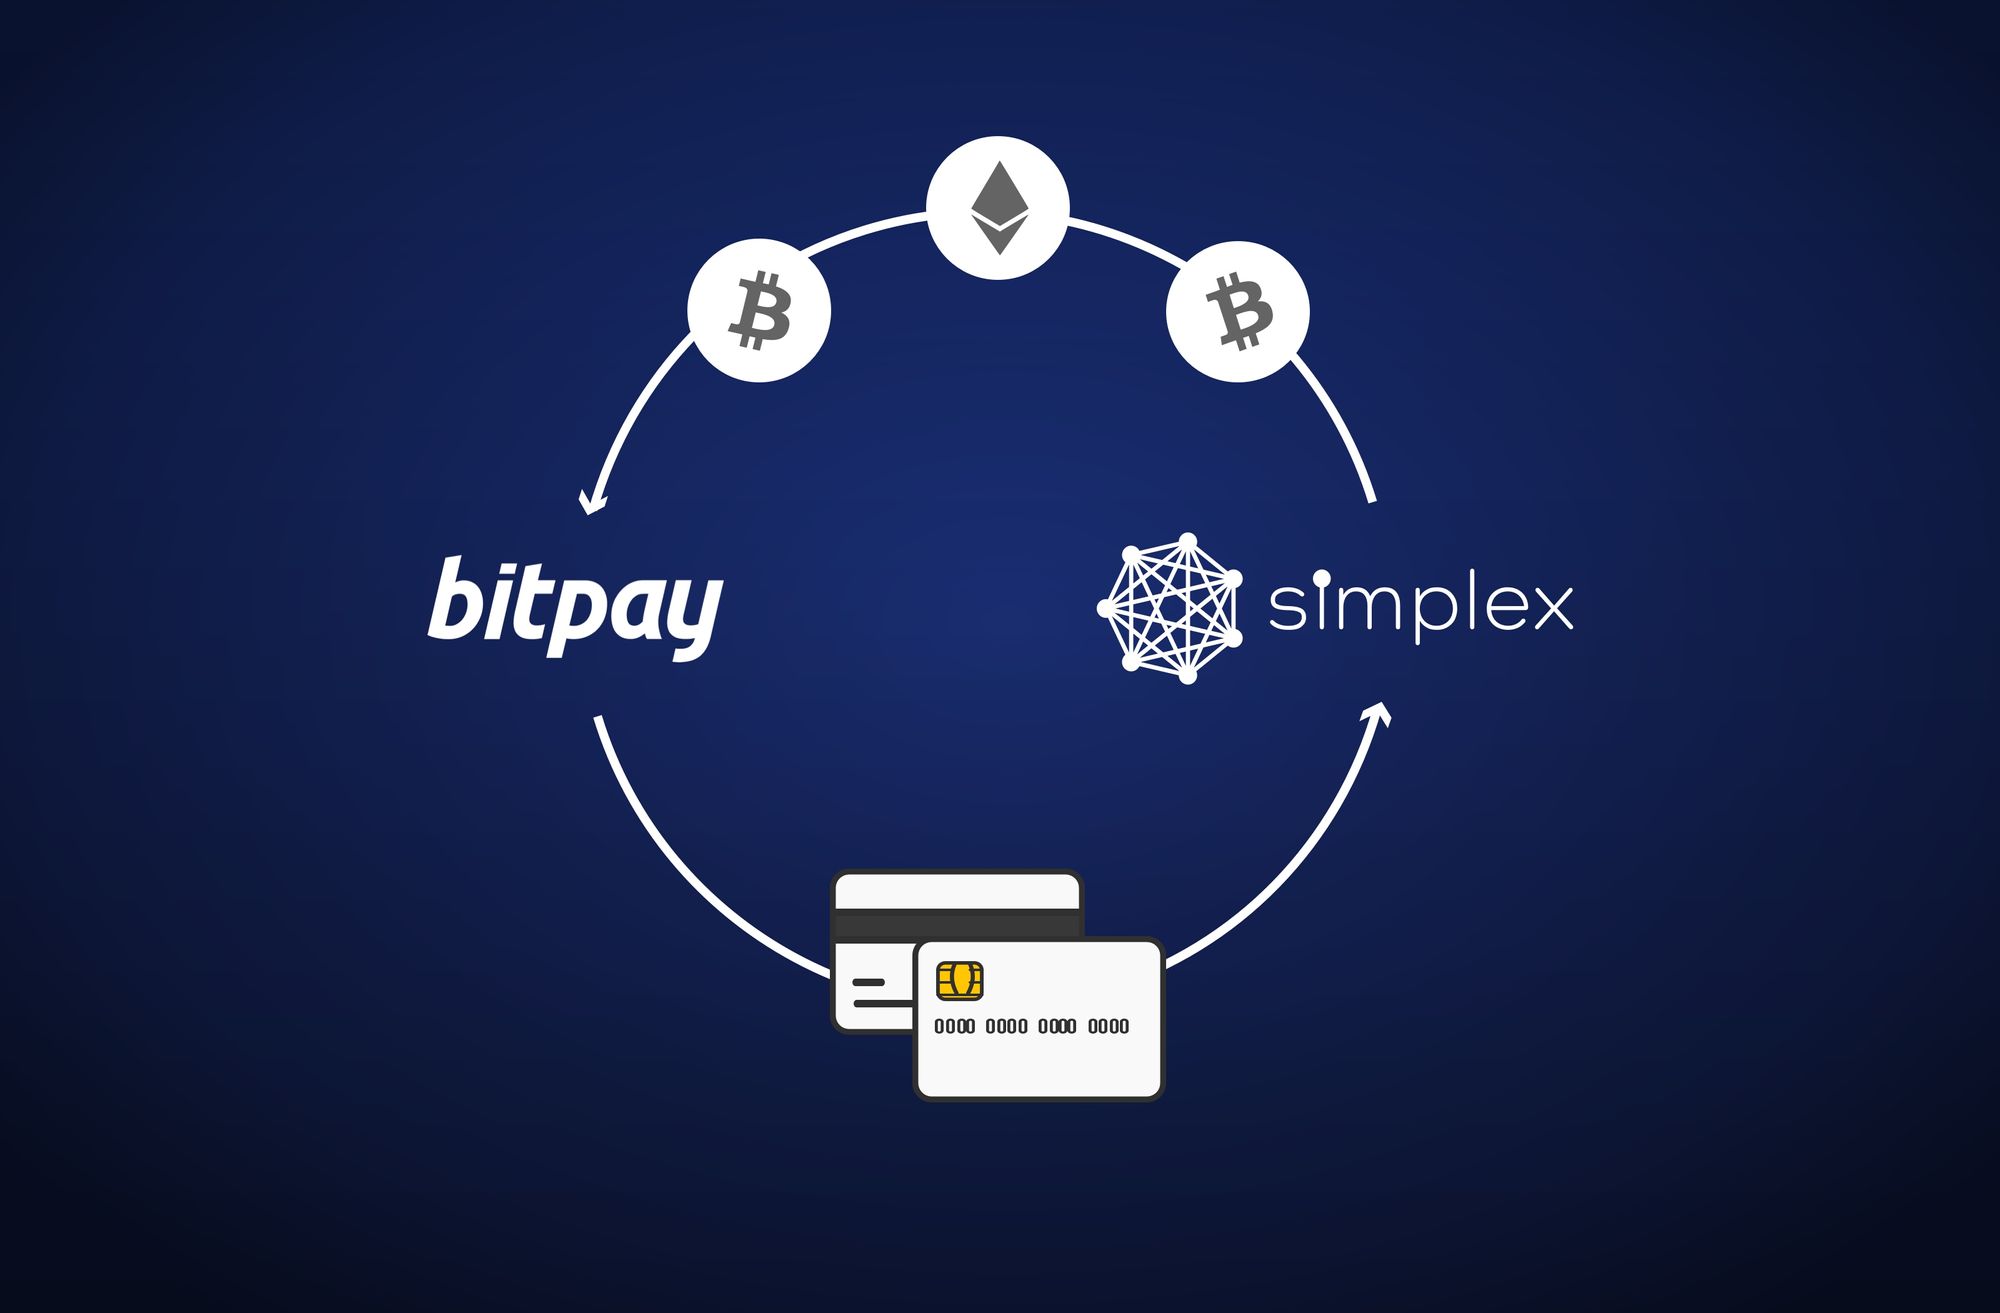 Secure your bitcoin with the open source, HD‑multisignature wallet from BitPay.